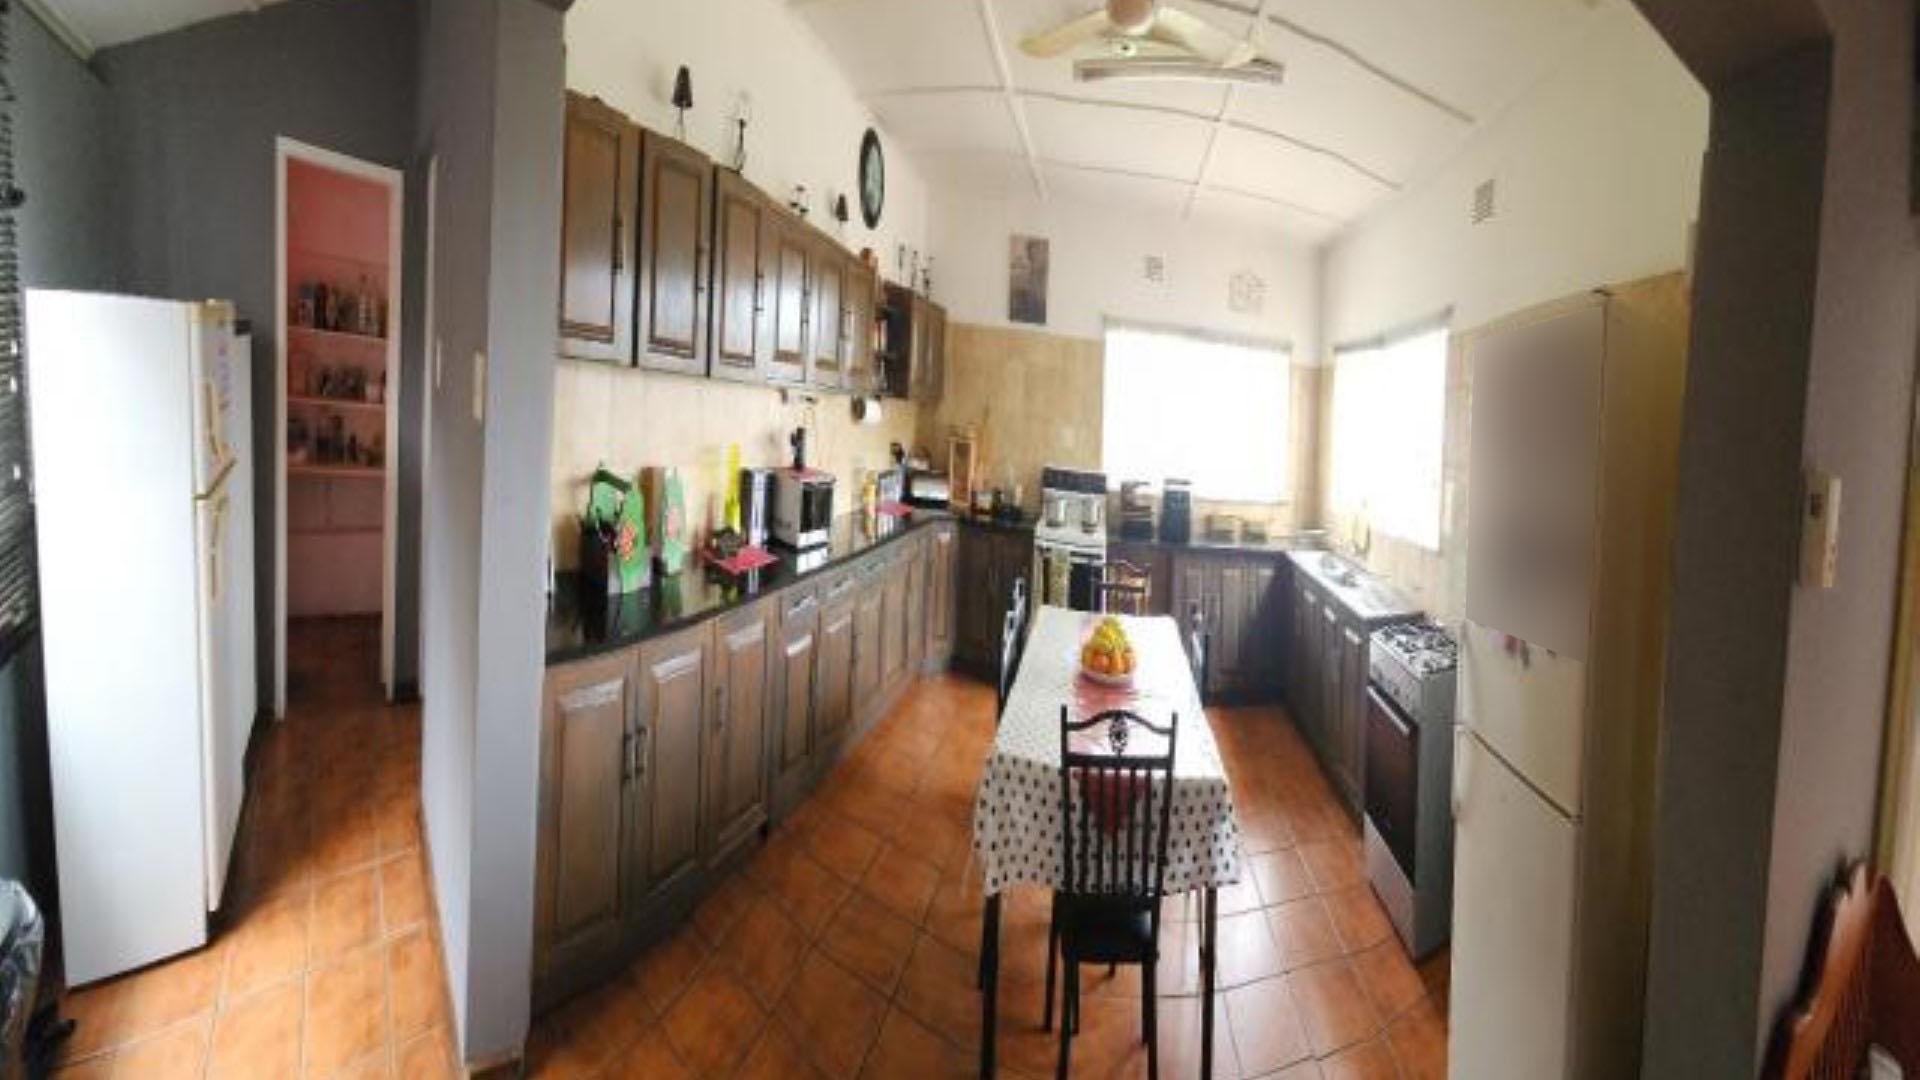 Kitchen of property in White River